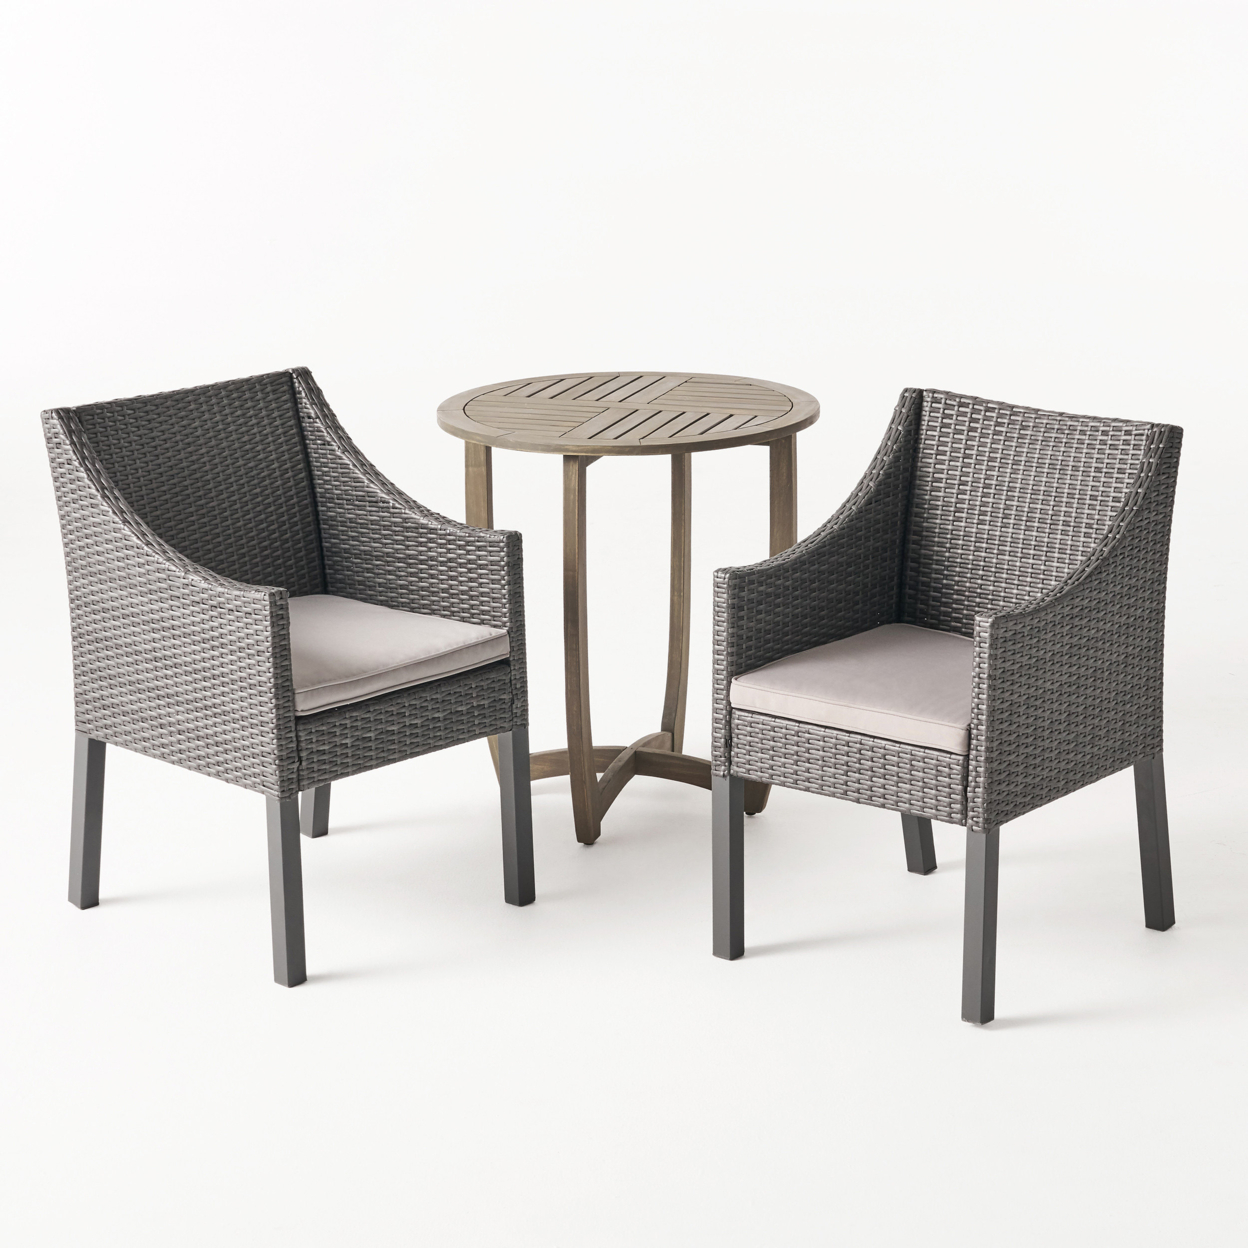 Matthew Outdoor 3 Piece Wood And Wicker Bistro Set, Gray And Gray